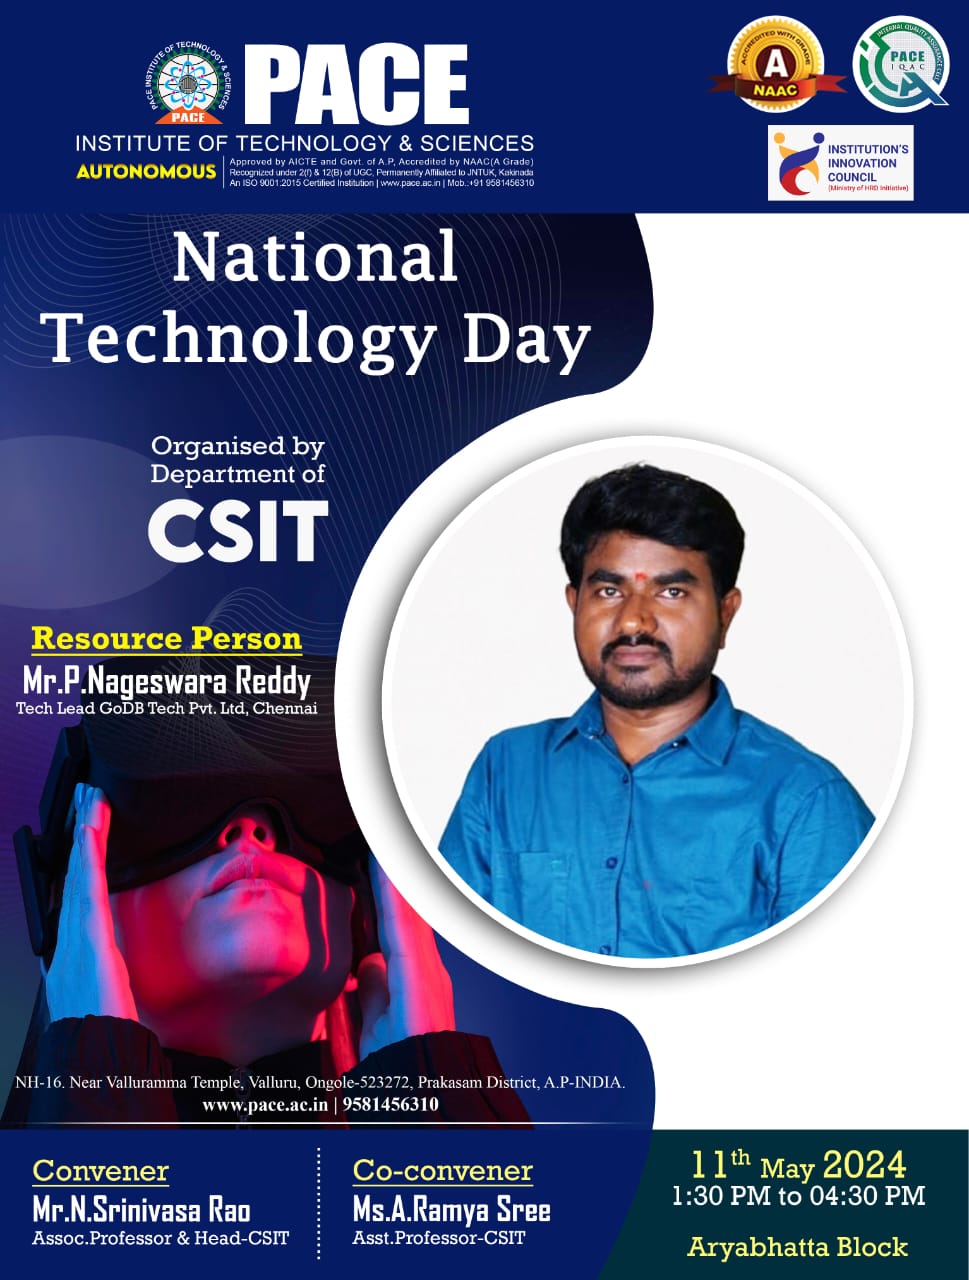 National Technology Day Organised Department of CSIT